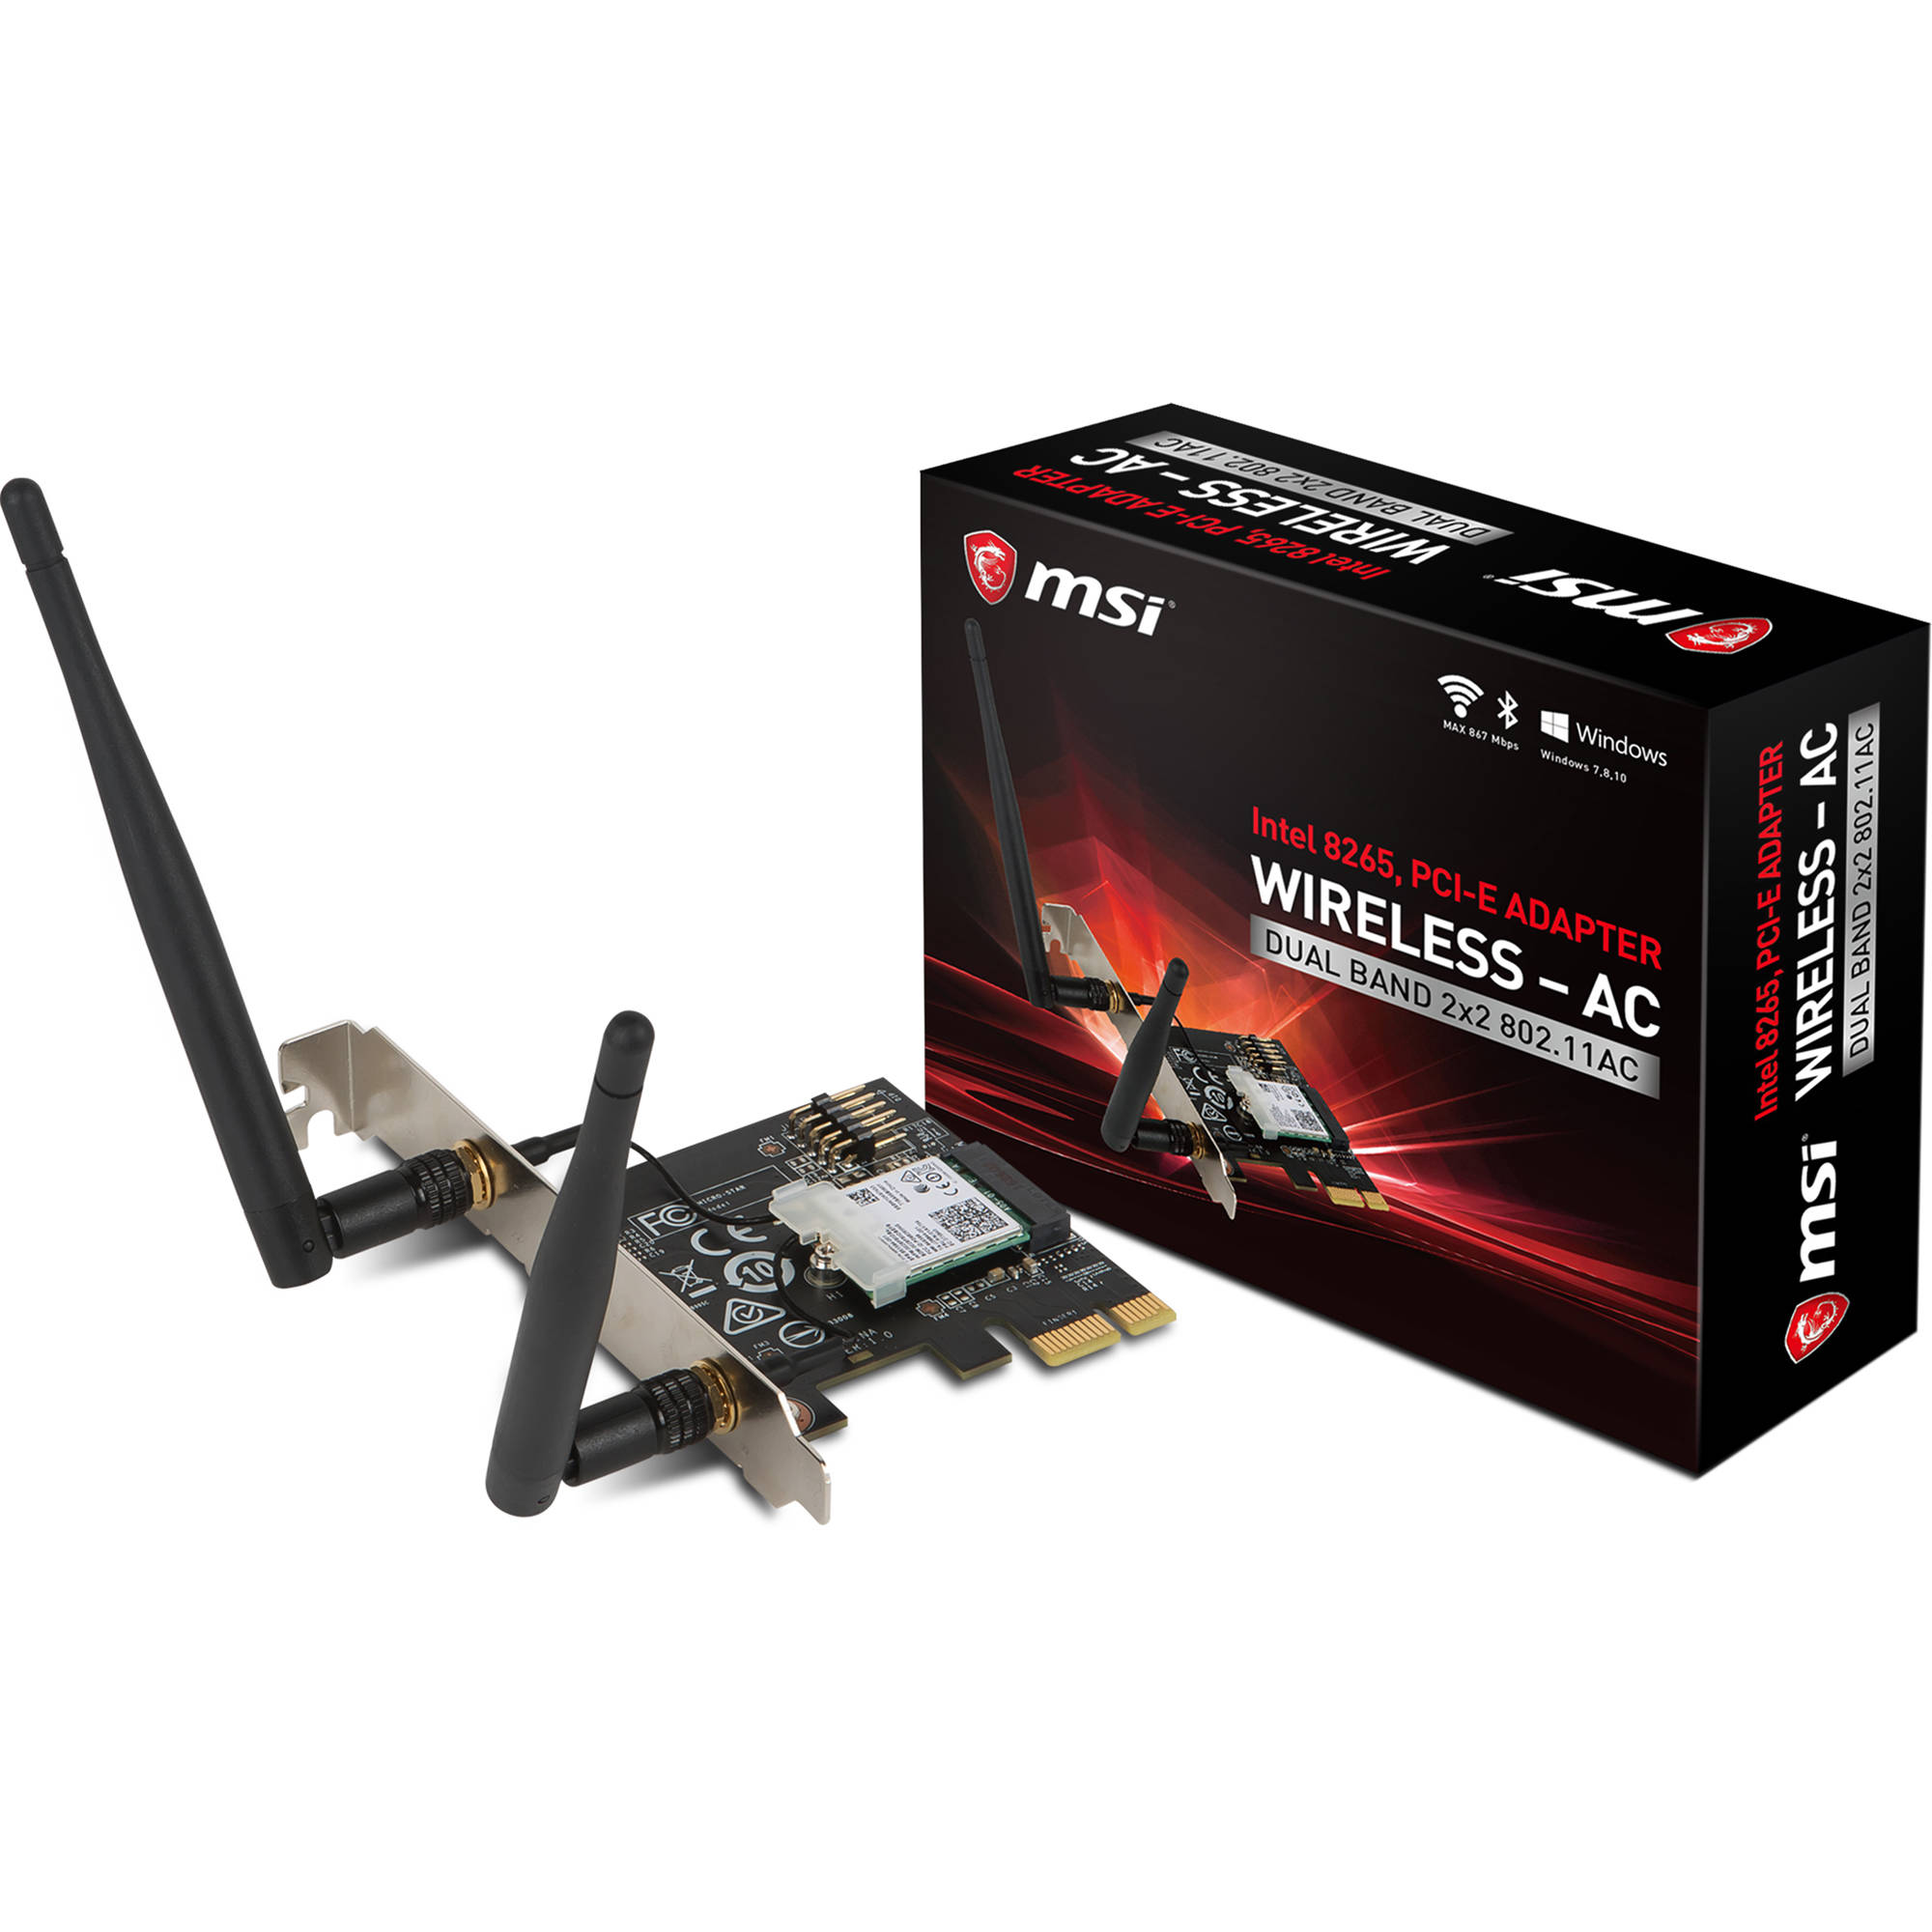 Msi network & wireless cards drivers